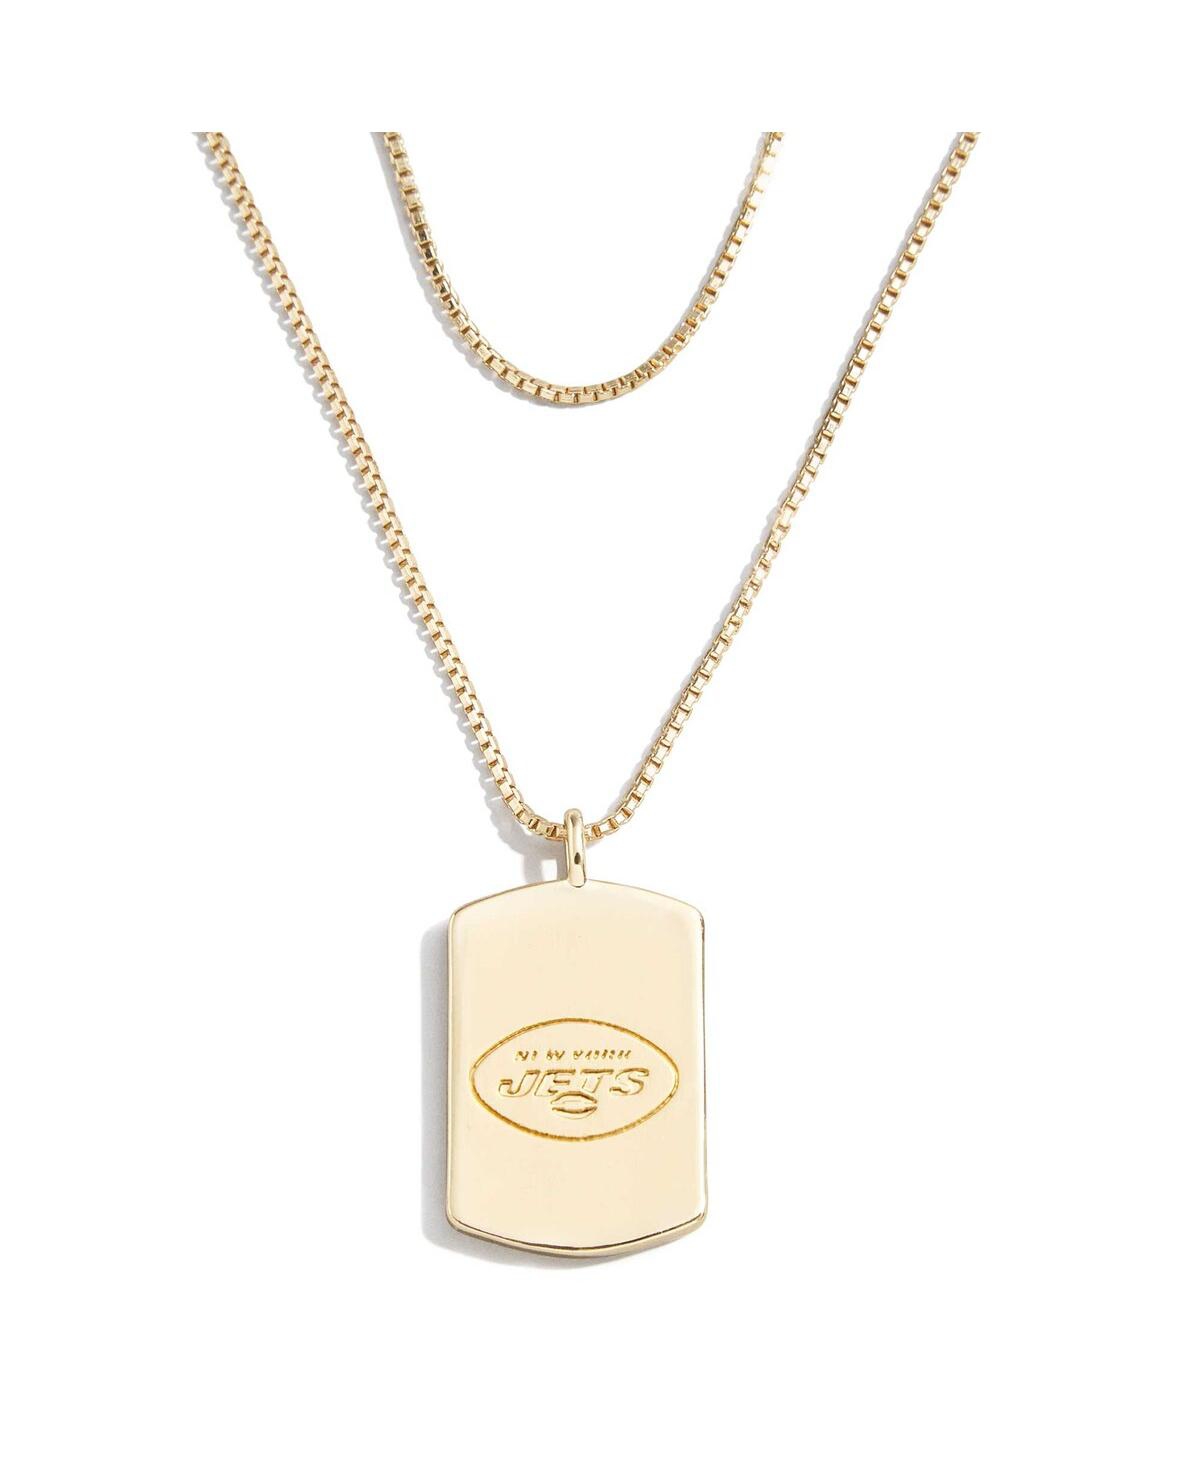 Shop Wear By Erin Andrews Women's  X Baublebar New York Jets Gold Dog Tag Necklace